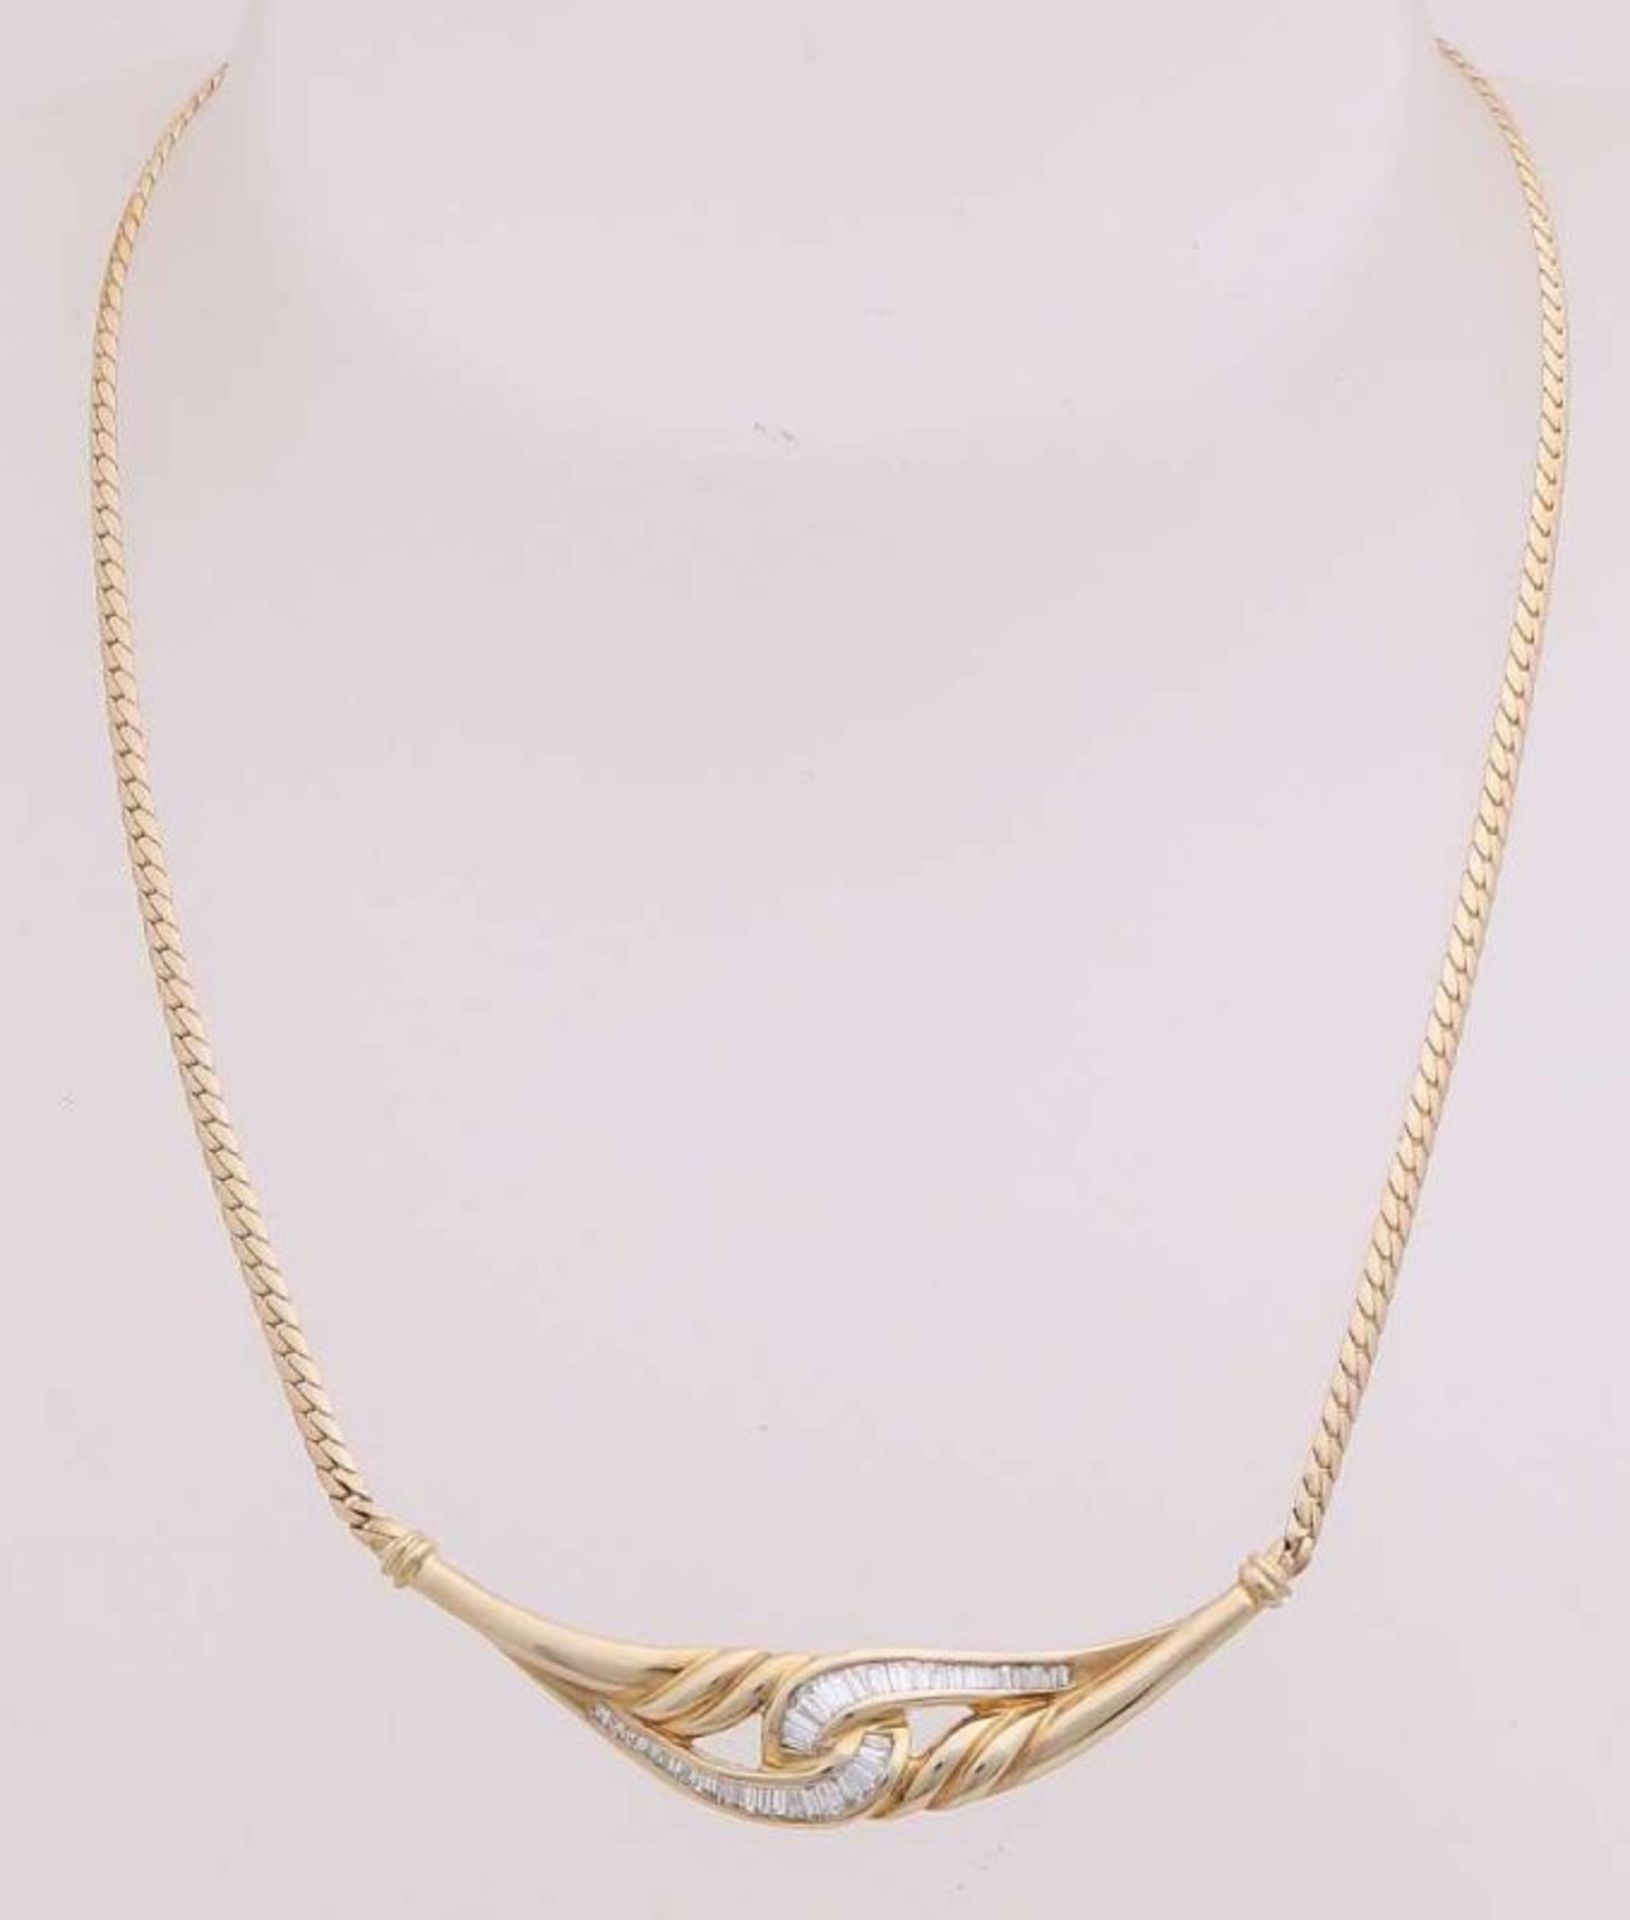 Beautiful golden choker, 585/000, with diamond. Choker with an oval gourmet necklace in the middle